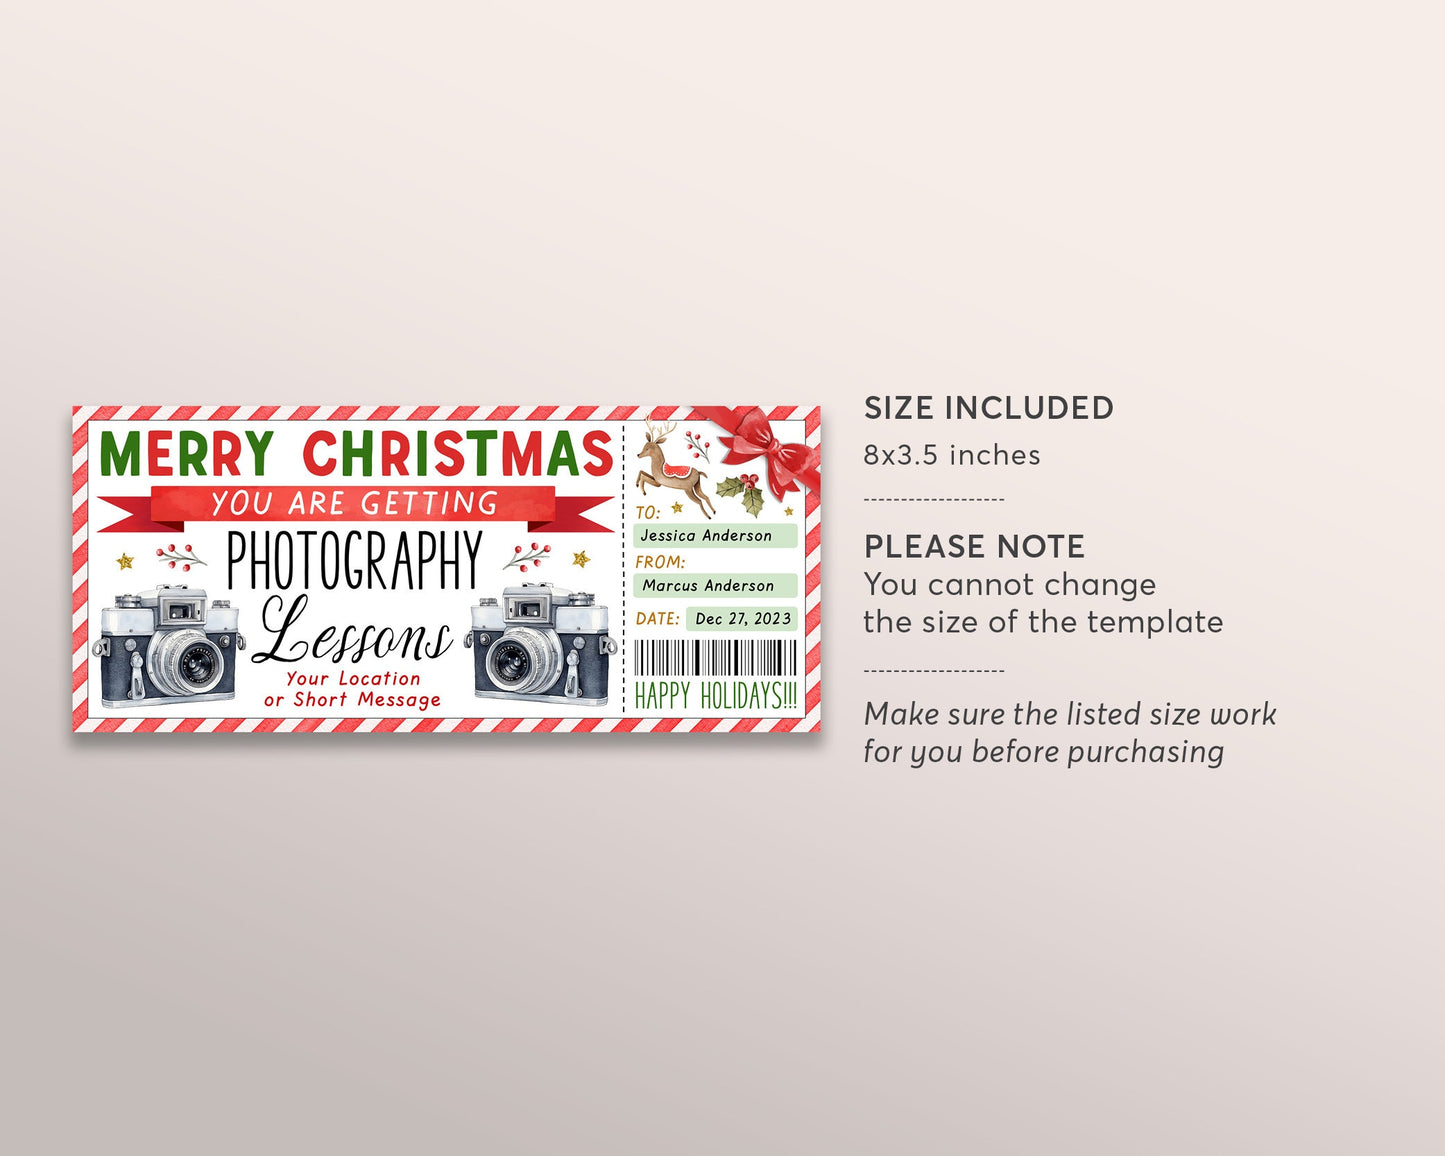 Photography Lessons Gift Voucher Ticket Editable Template, Christmas Holiday Photography Experience Gift Certificate, Surprise Camera Coupon